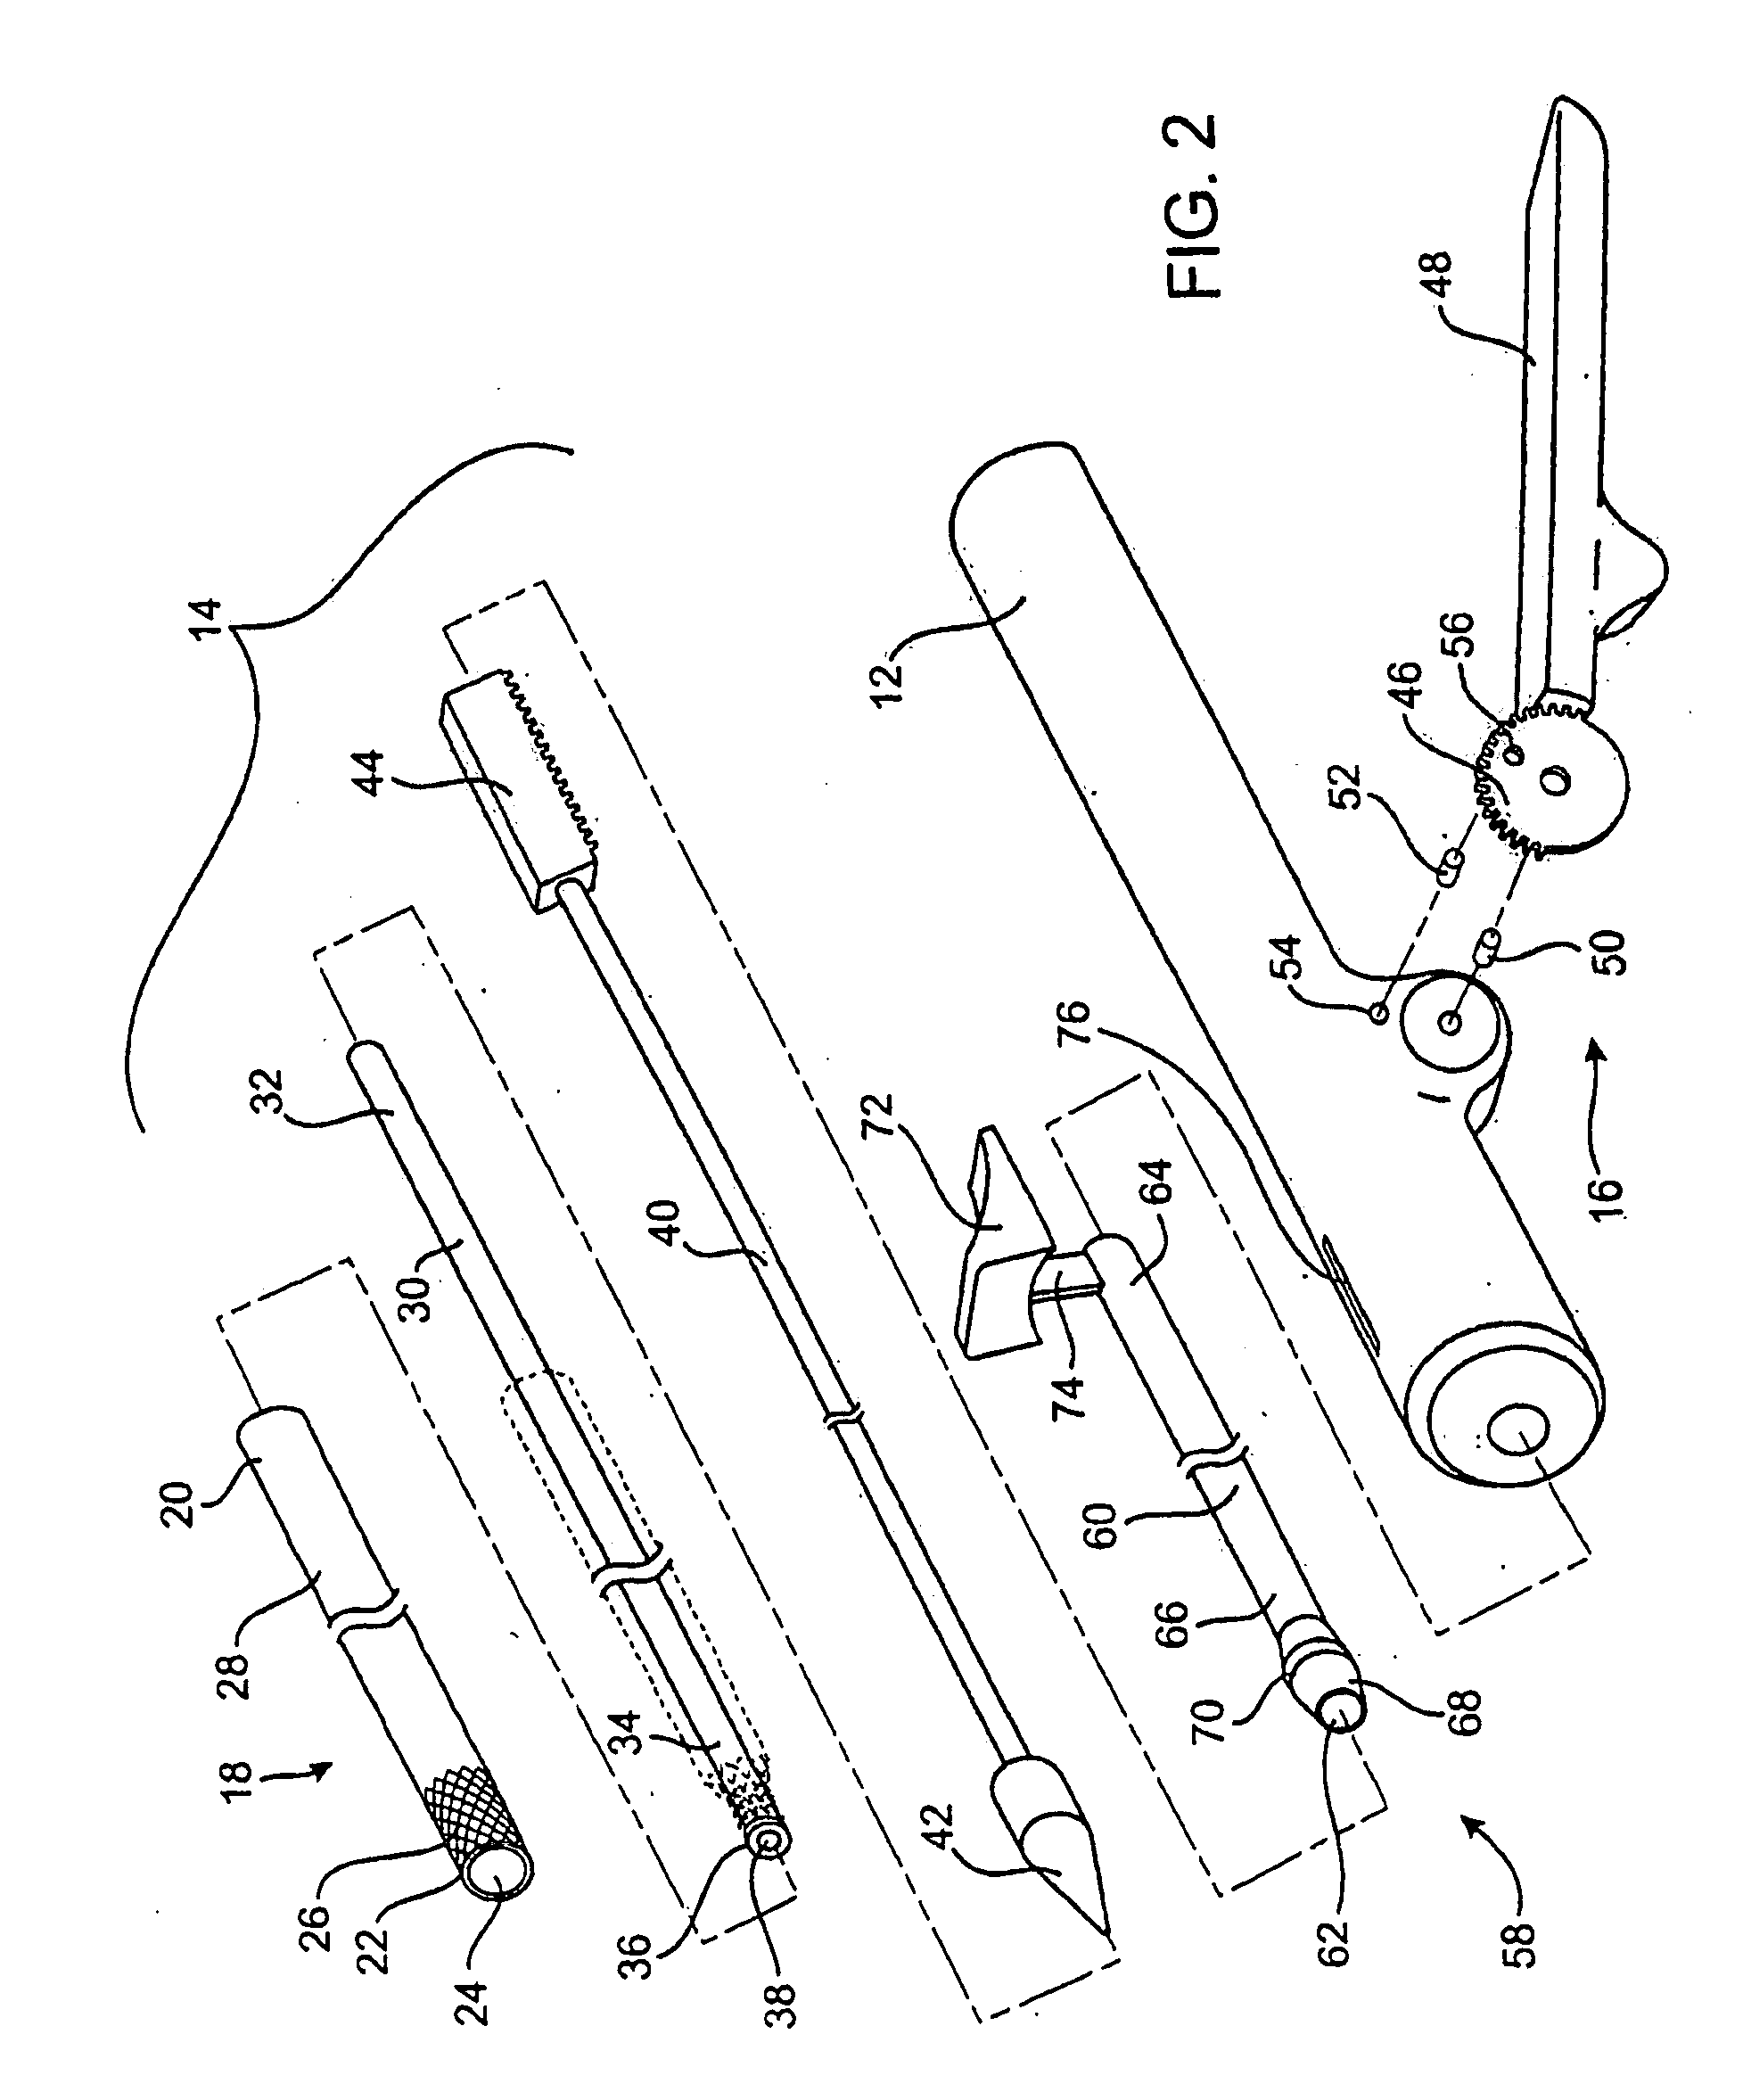 Methods and Devices for Placing a Conduit in Fluid Communication with a Target Vessel